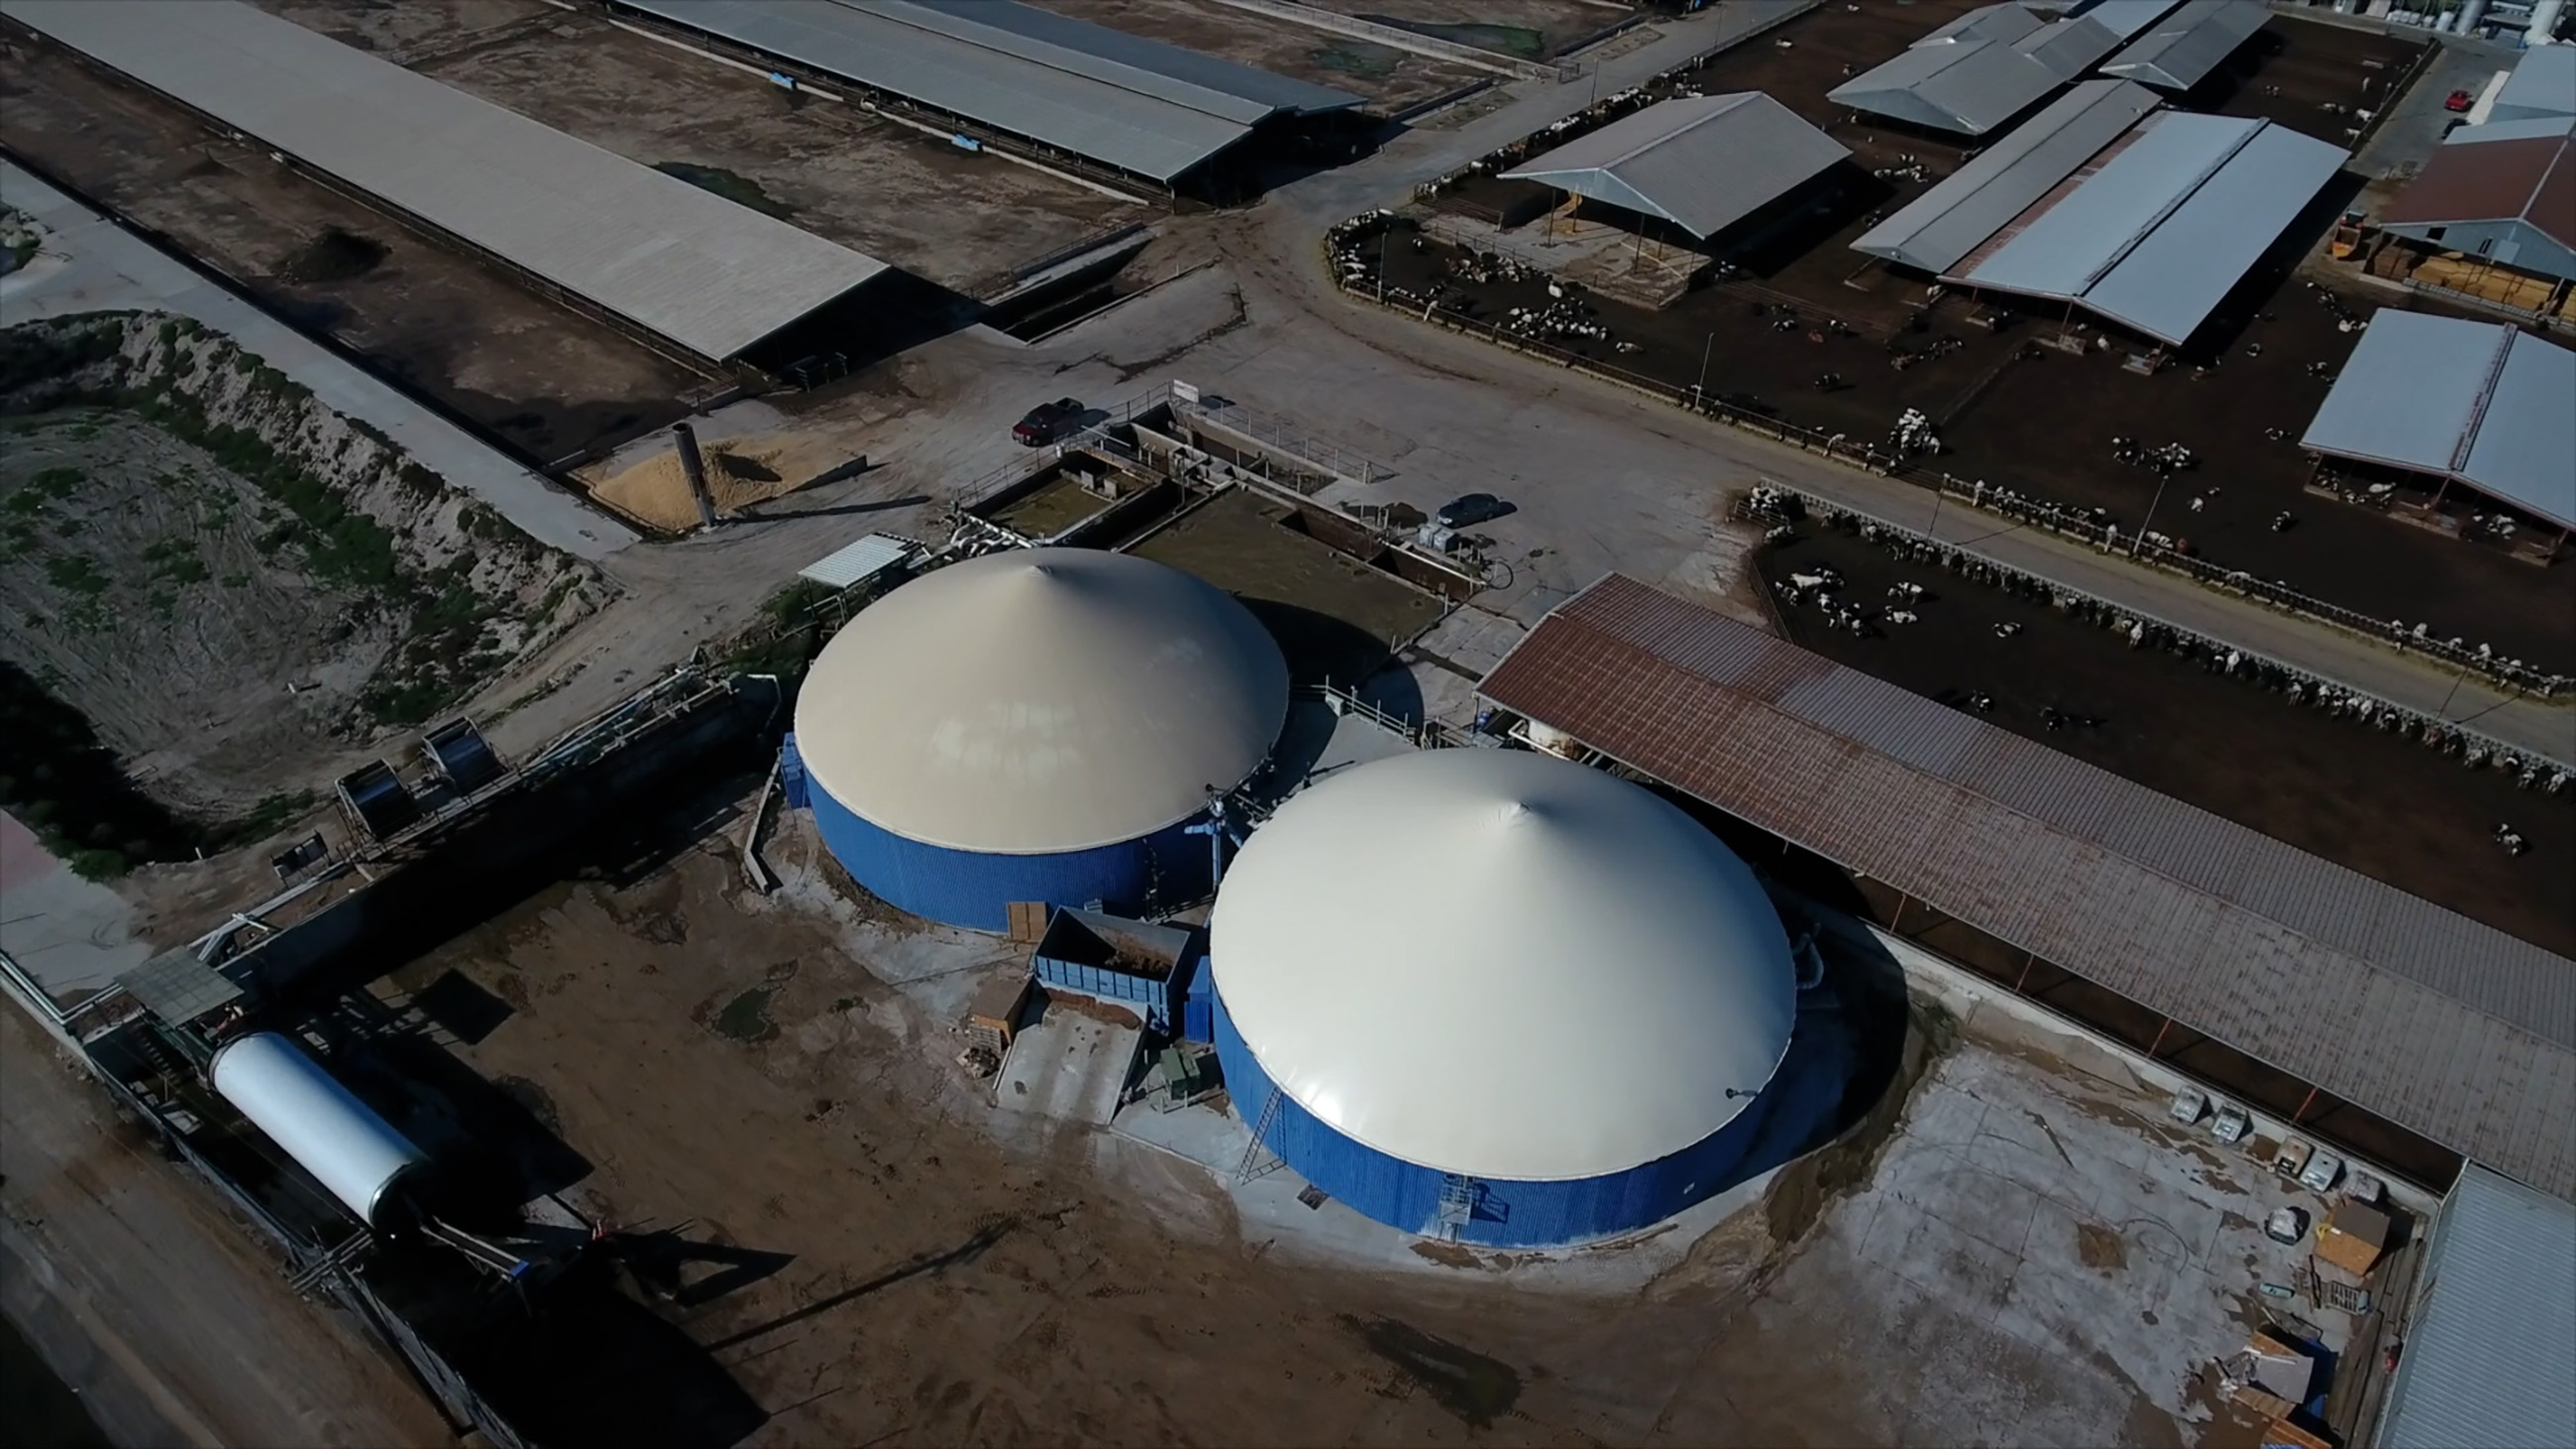 Arial view of methane digester, a focal point of sustainable dairy farming at Fiscalini Farms.